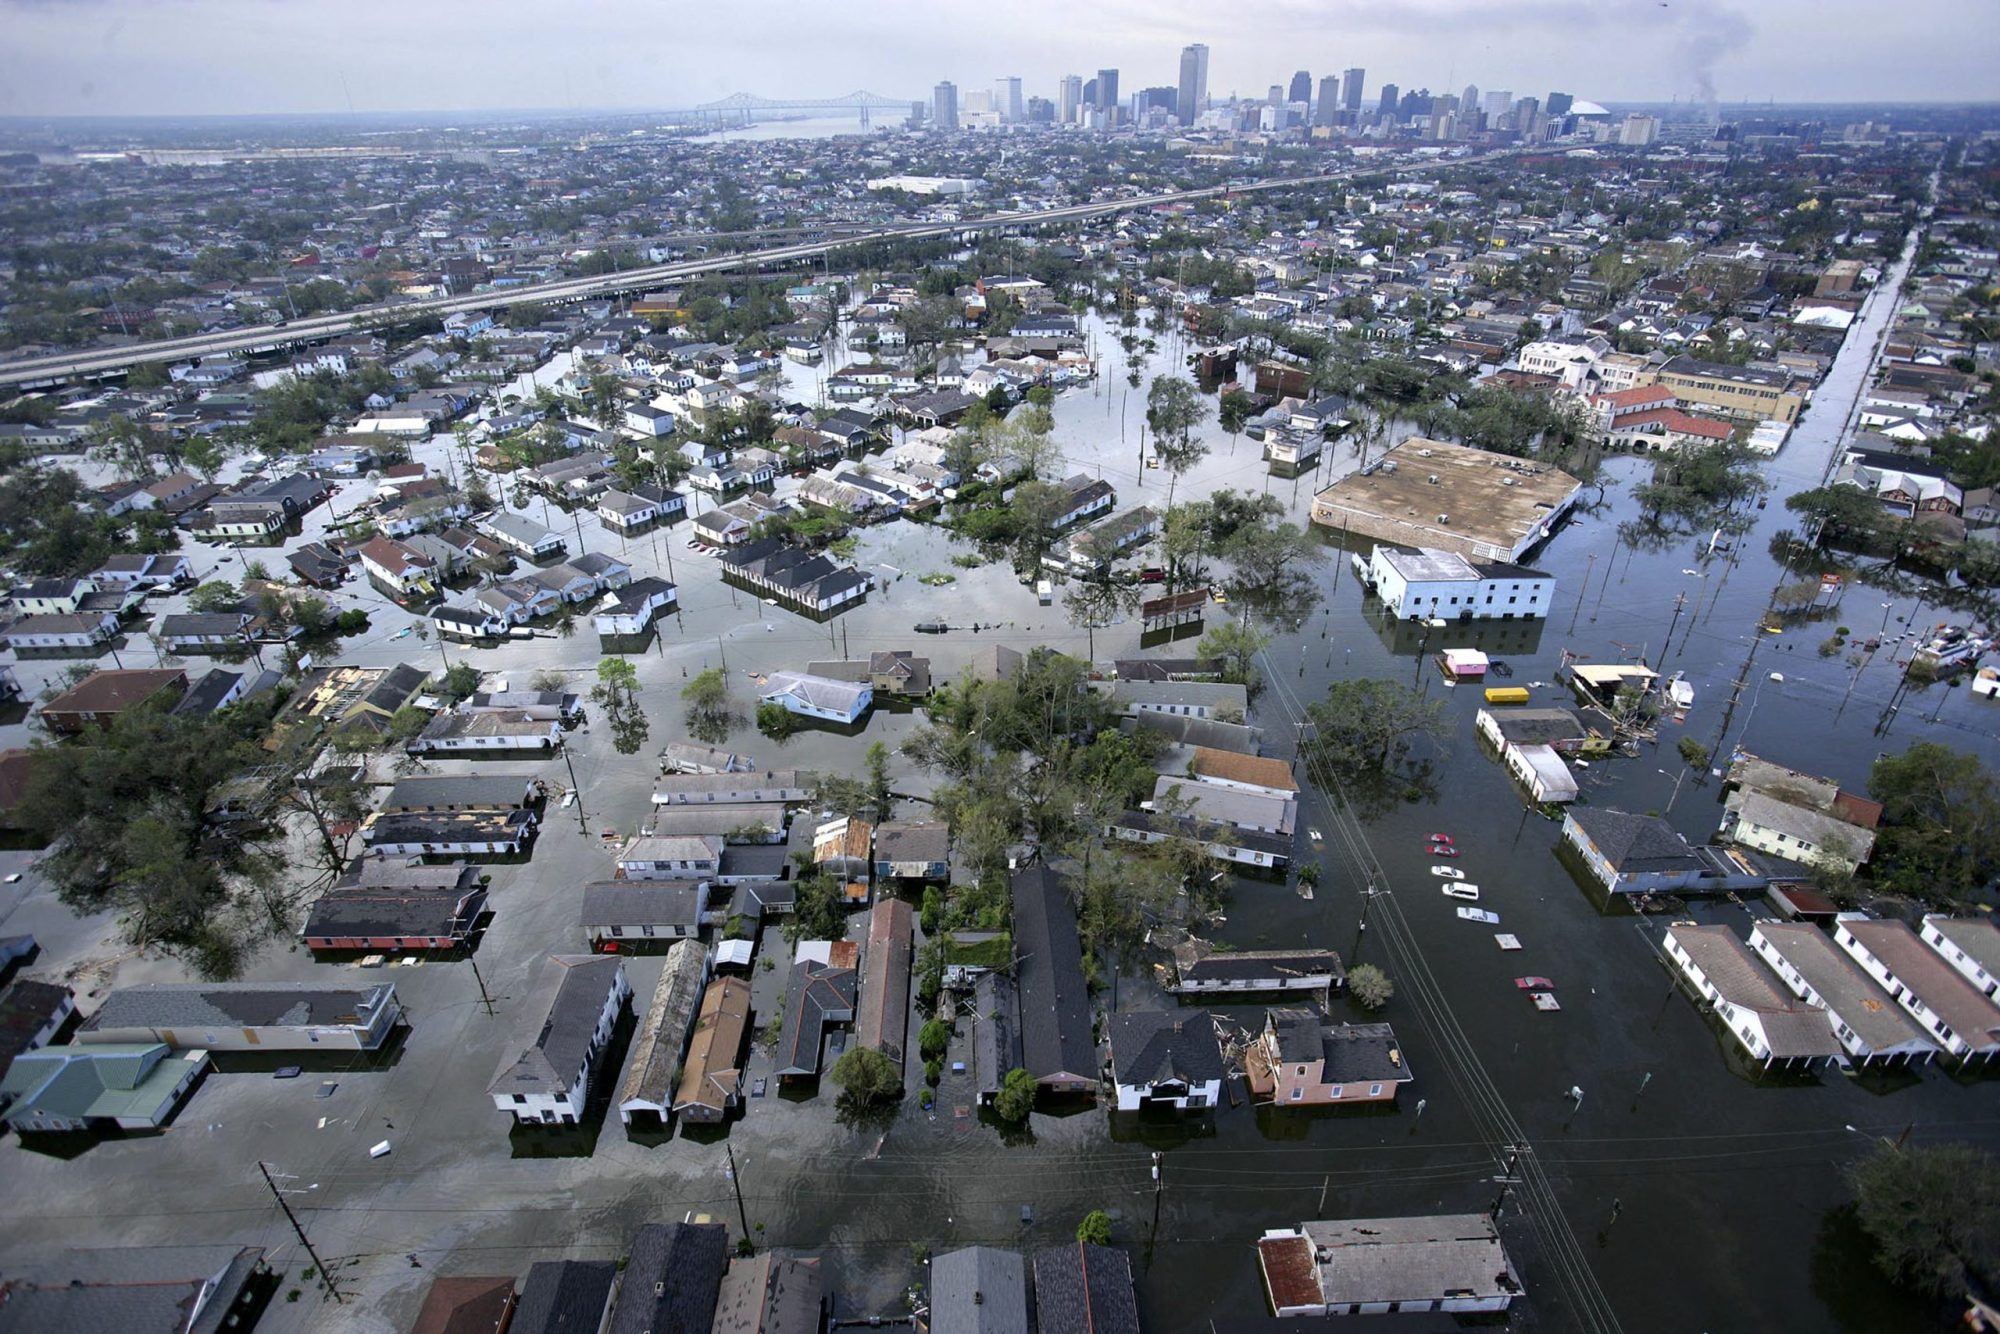 Flood waters from Hurricane Katrina cover streets 30 August, 2005 in New Orleans, Louisiana. Photo by POOL/POOL/AFP via Getty Images